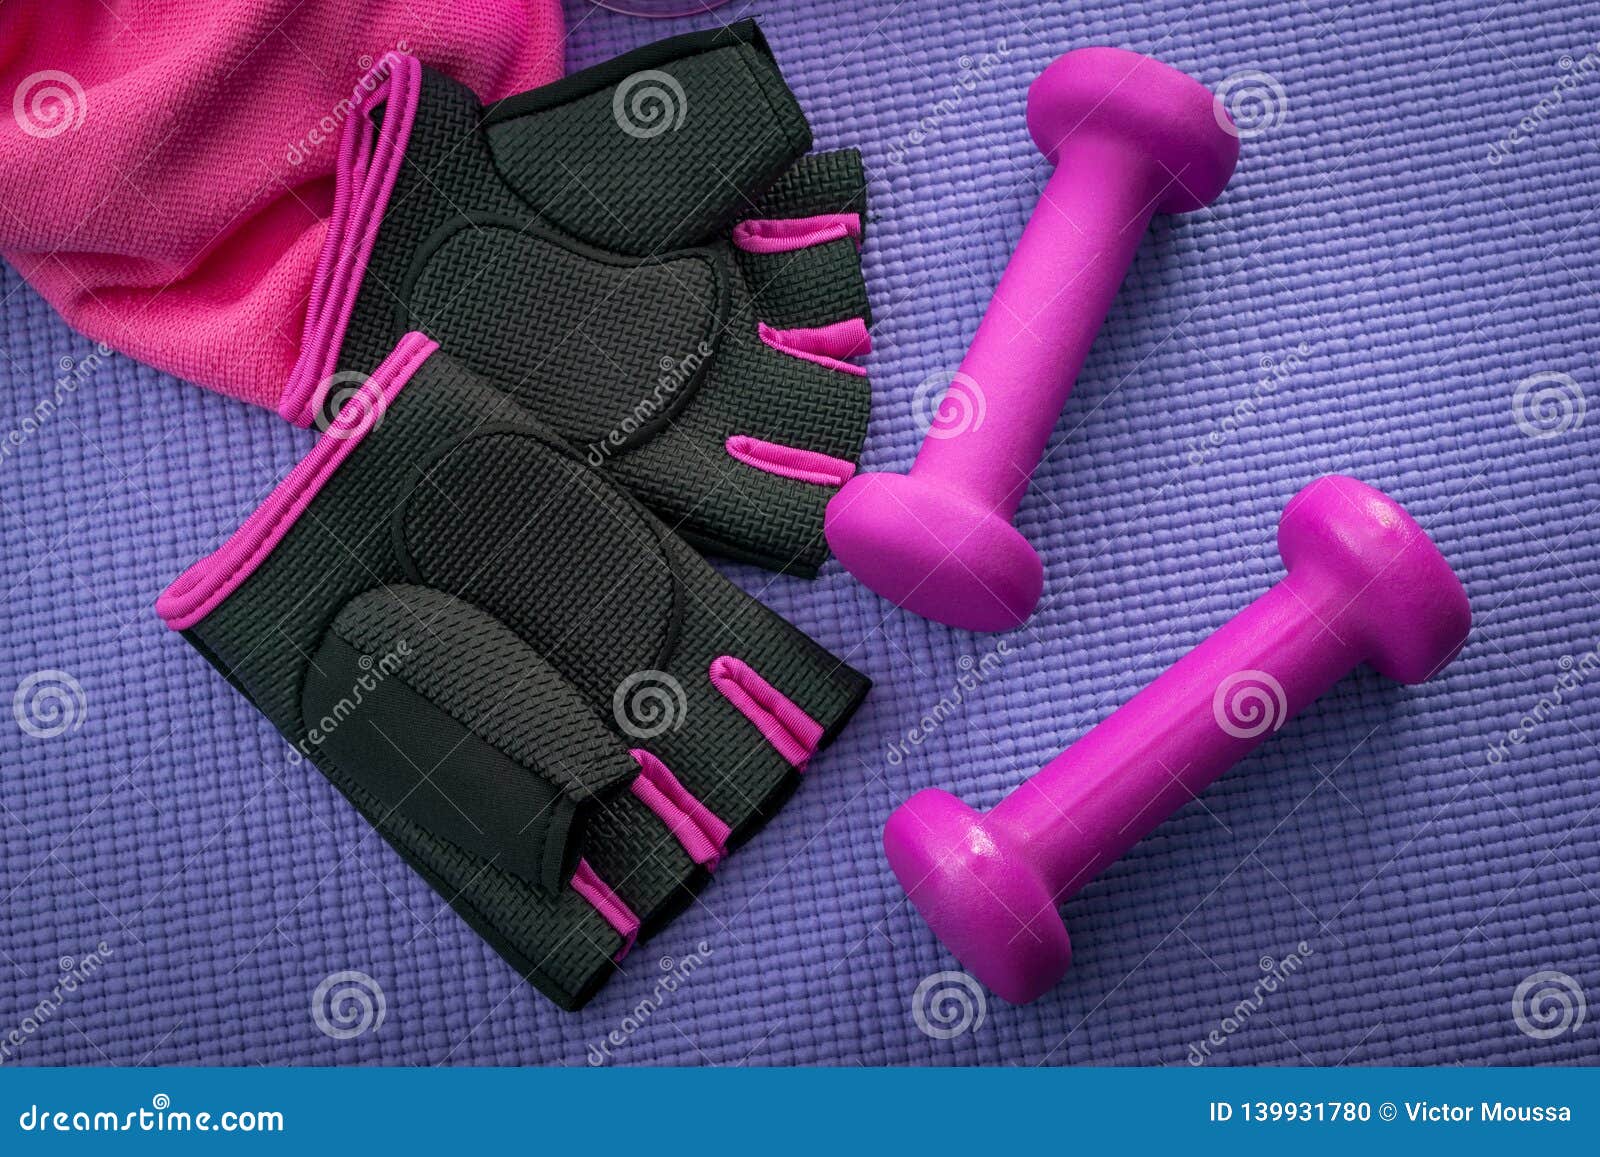 https://thumbs.dreamstime.com/z/healthy-lifestyle-fitness-yoga-concept-girly-workout-equipment-like-pink-pair-gym-gloves-two-dumbbells-weights-139931780.jpg